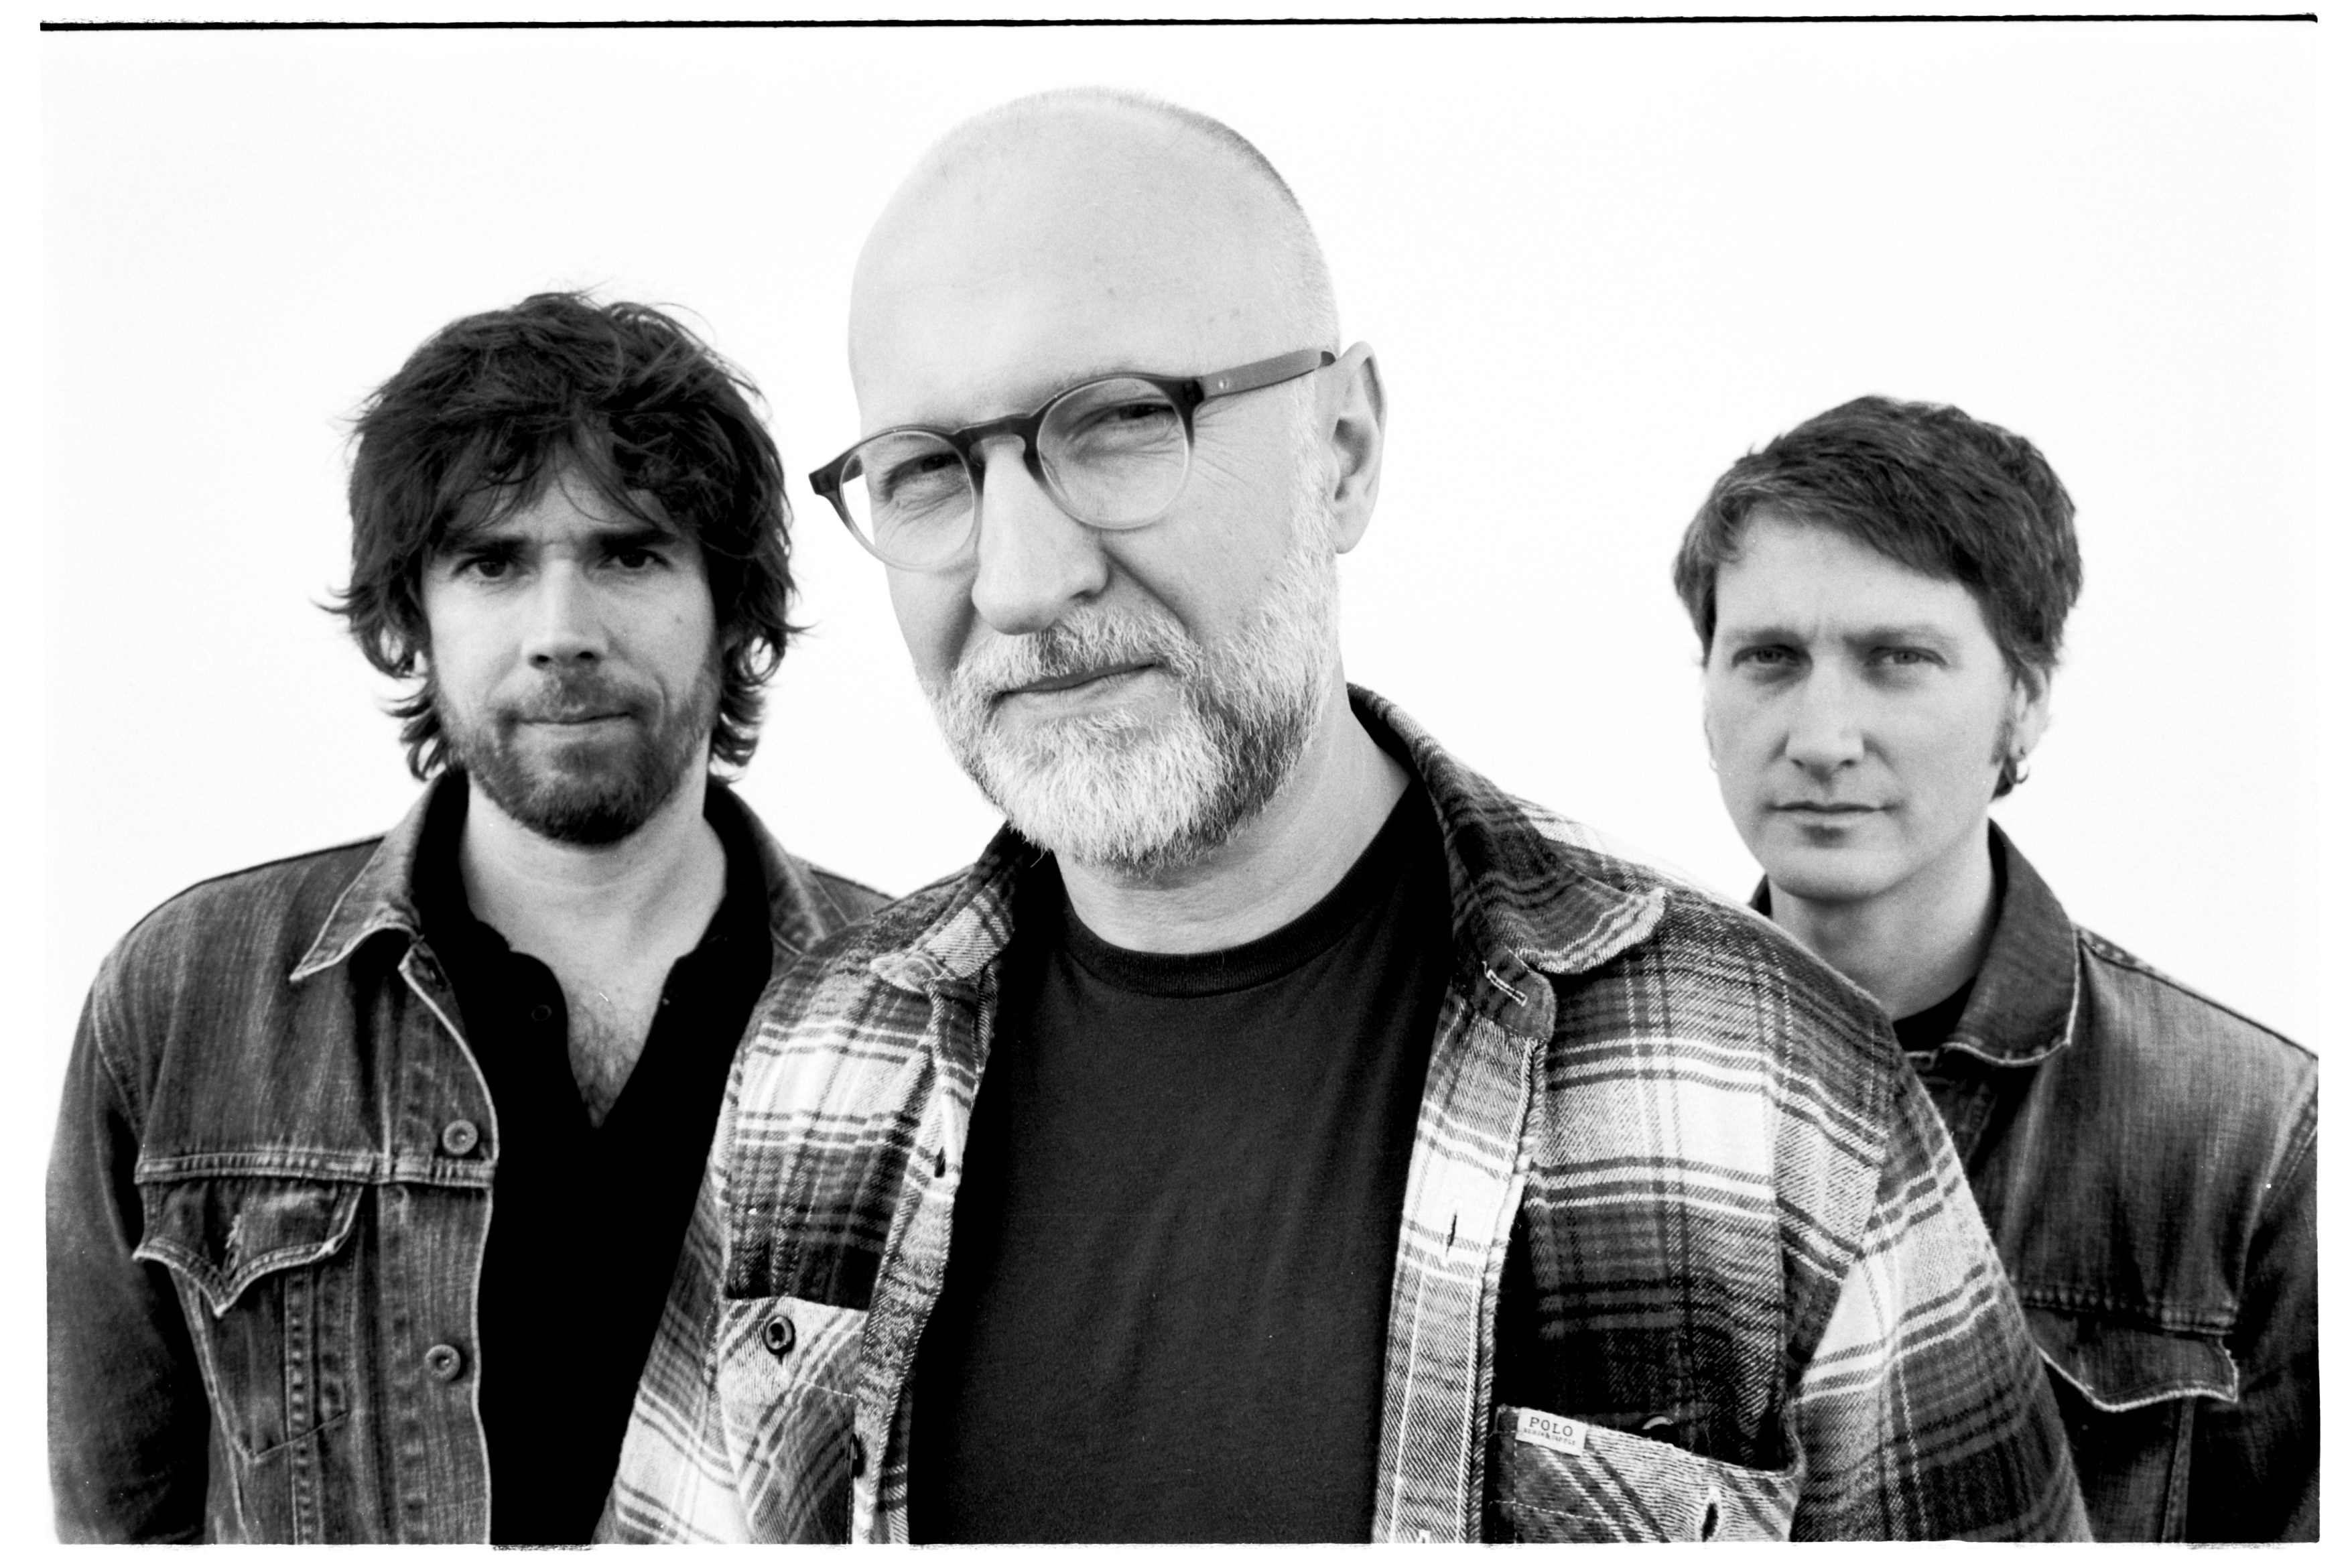 Bob Mould: “I think I’ve been able to put the past in perspective”